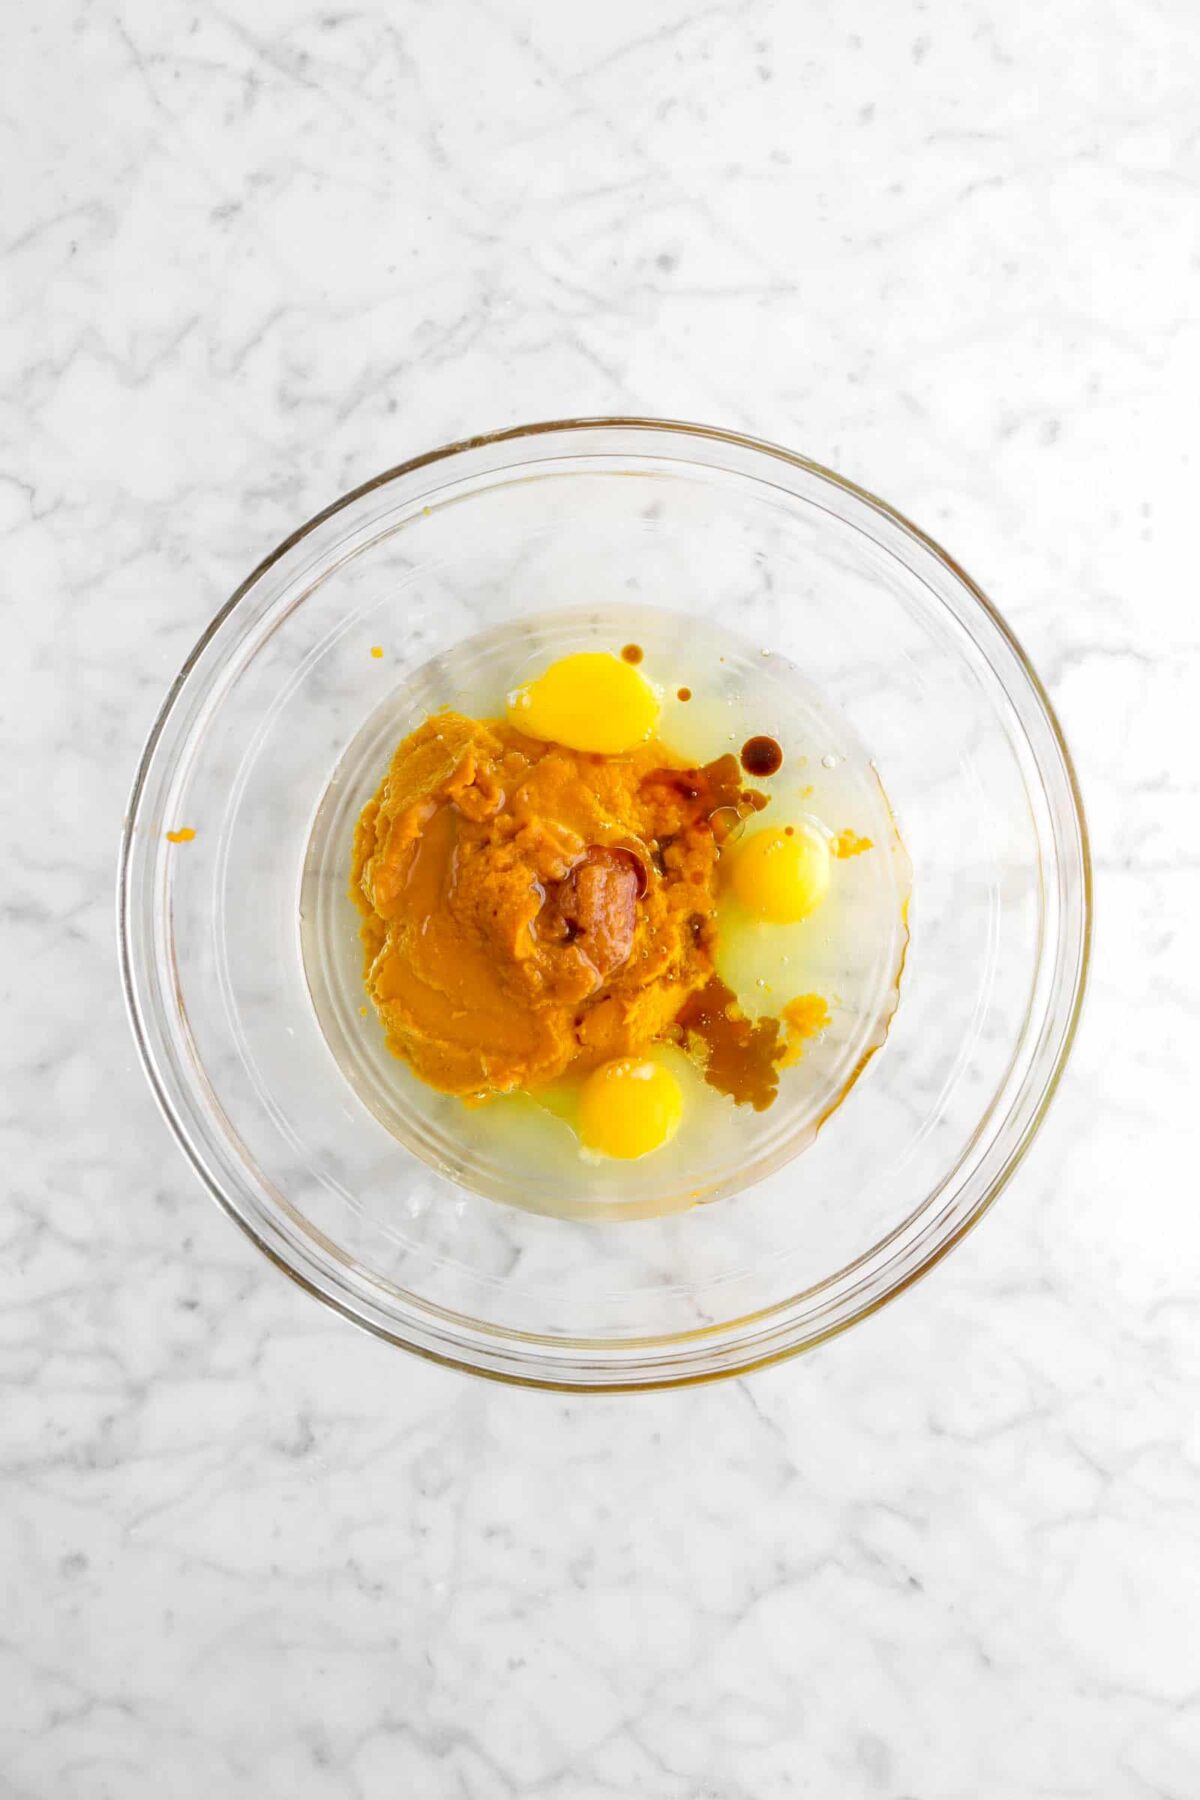 pumpkin, eggs, vanilla, and vegetable oil in a glass bowl